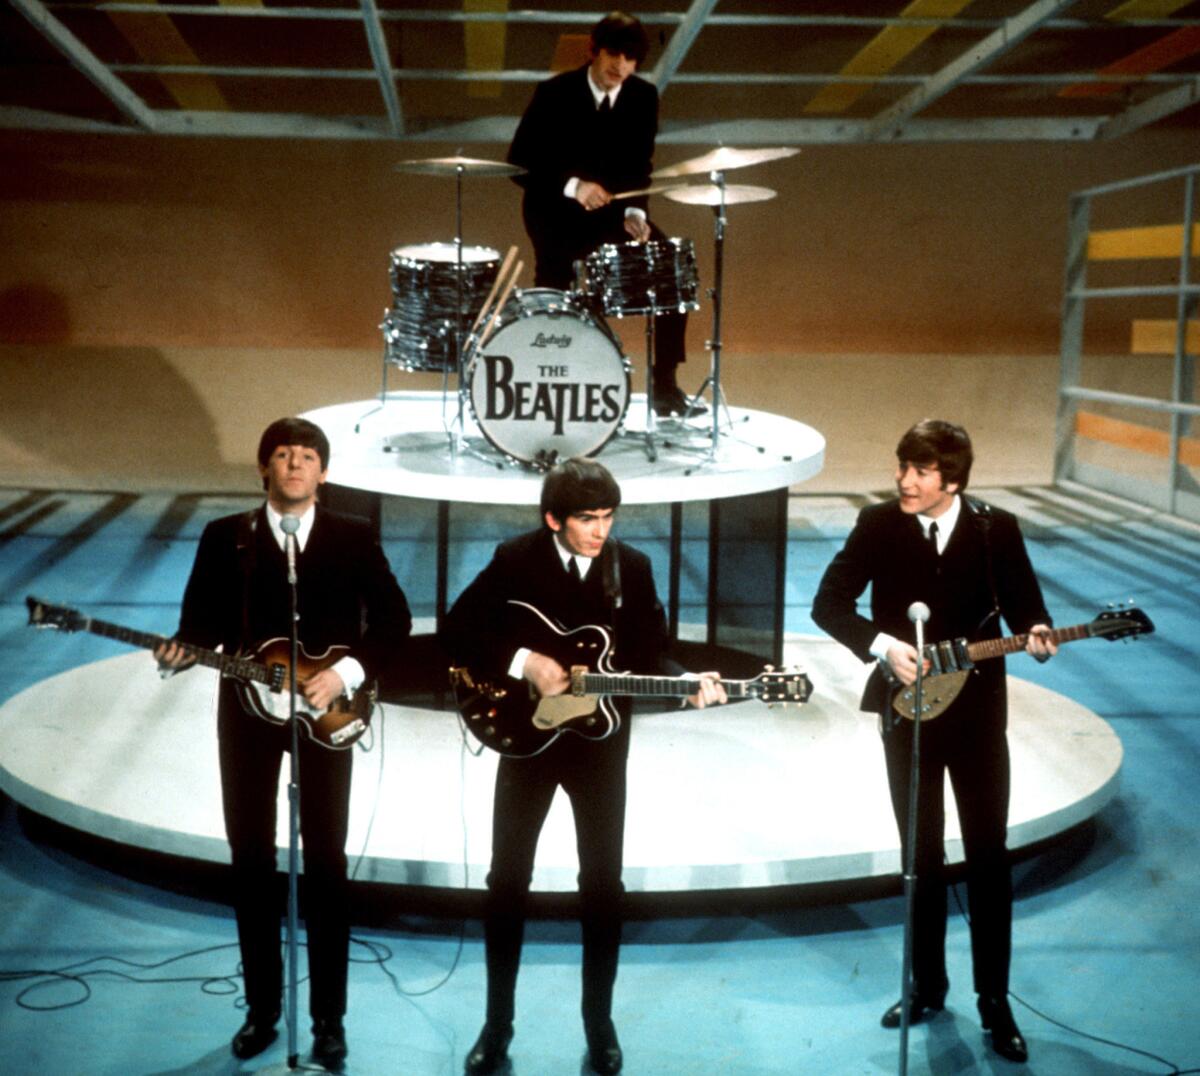 The four members of the Beatles perform on a TV soundstage in the 1964